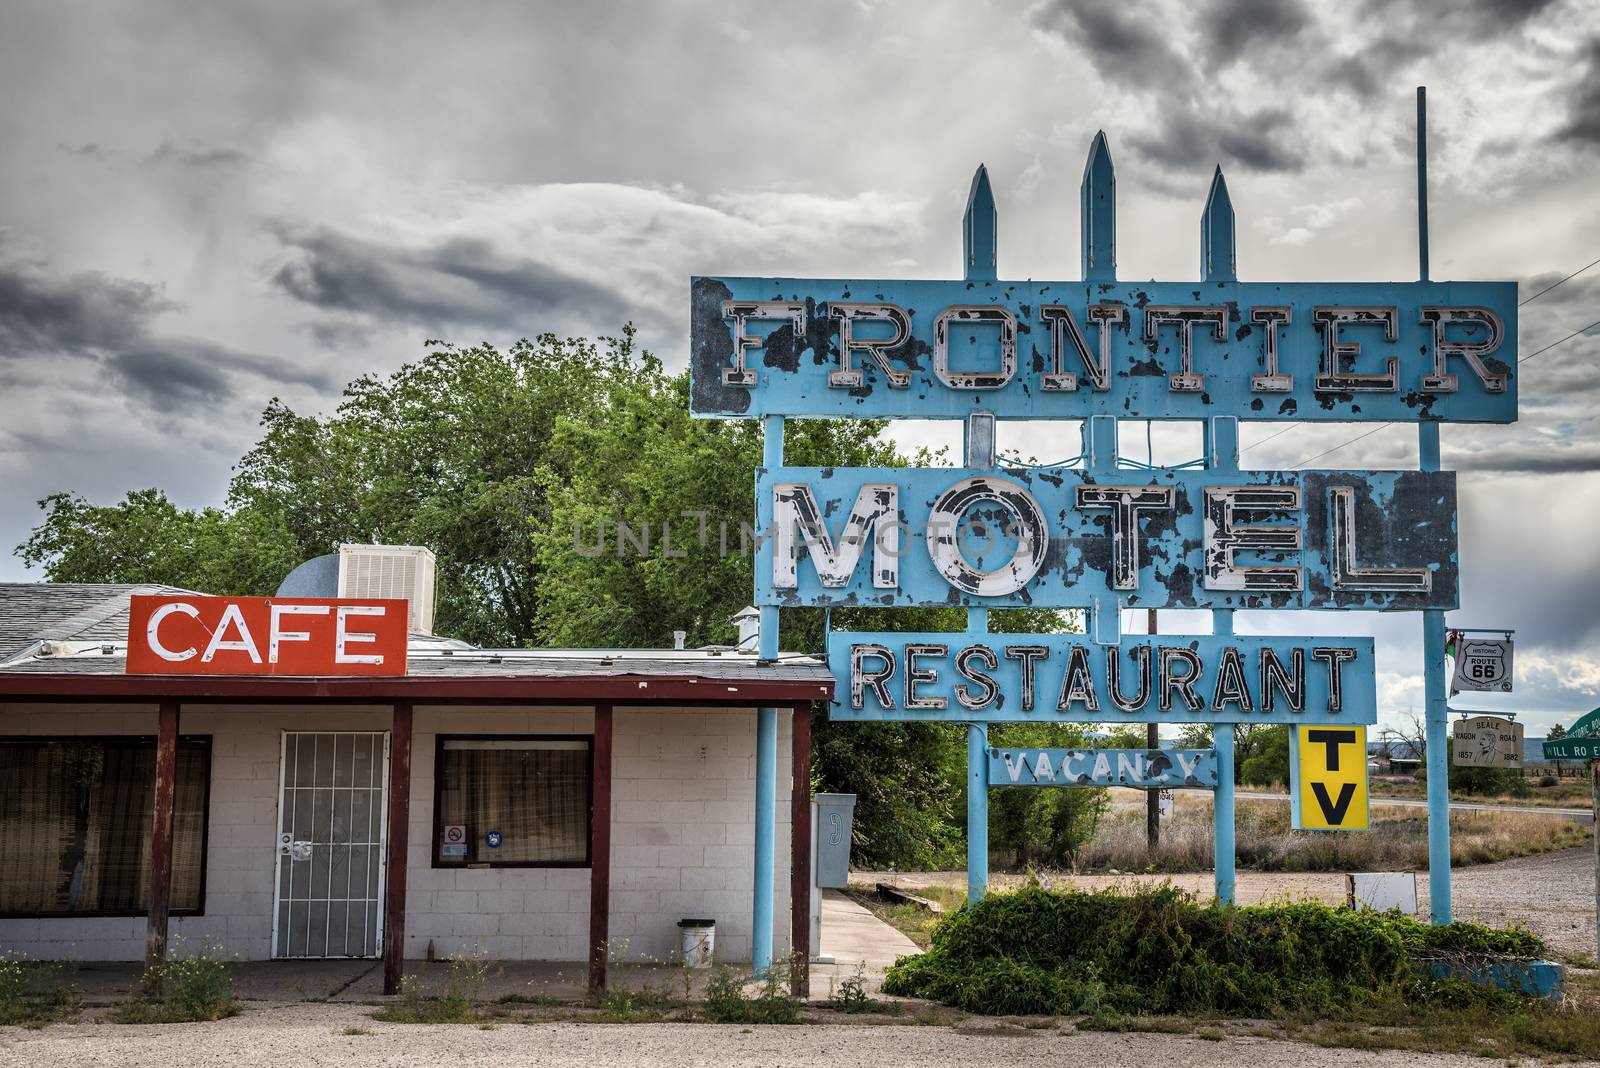 TRUXTON, ARIZONA, USA - MAY 18, 2016 : Abandoned Frontier Motel, Cafe and vintage neon sign on historic Route 66 in Mohave County, Arizona